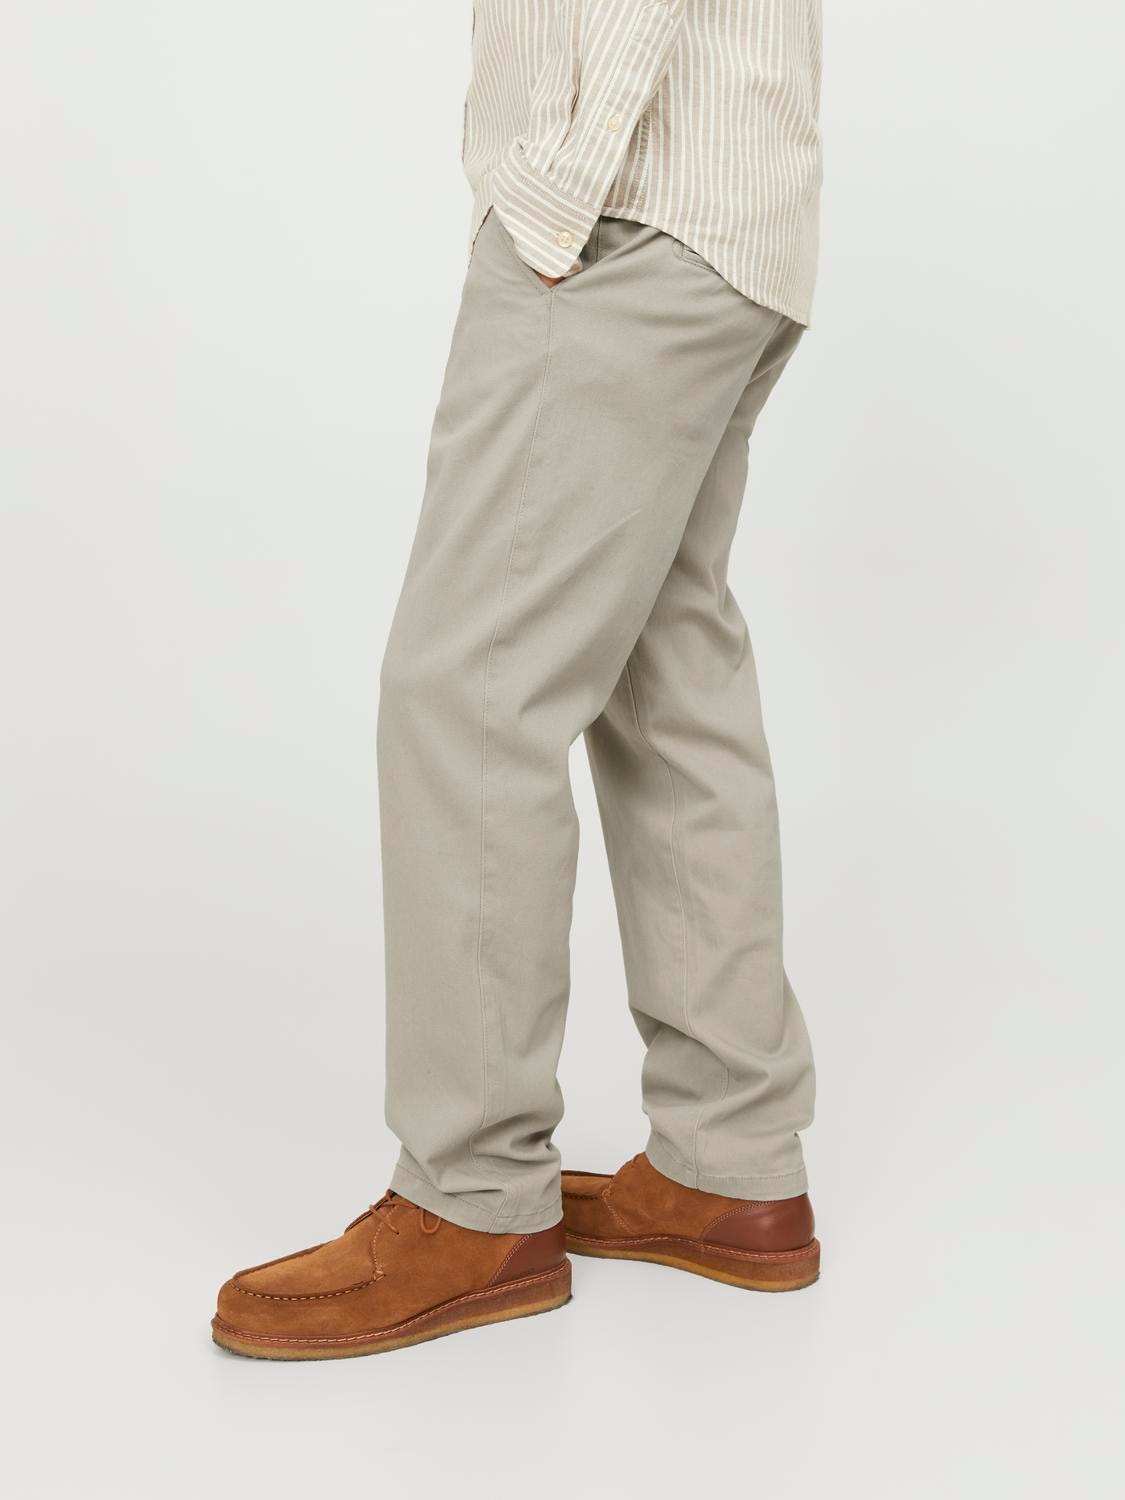 Jack & Jones Relaxed Fit Chino trousers -Crockery - 12212936